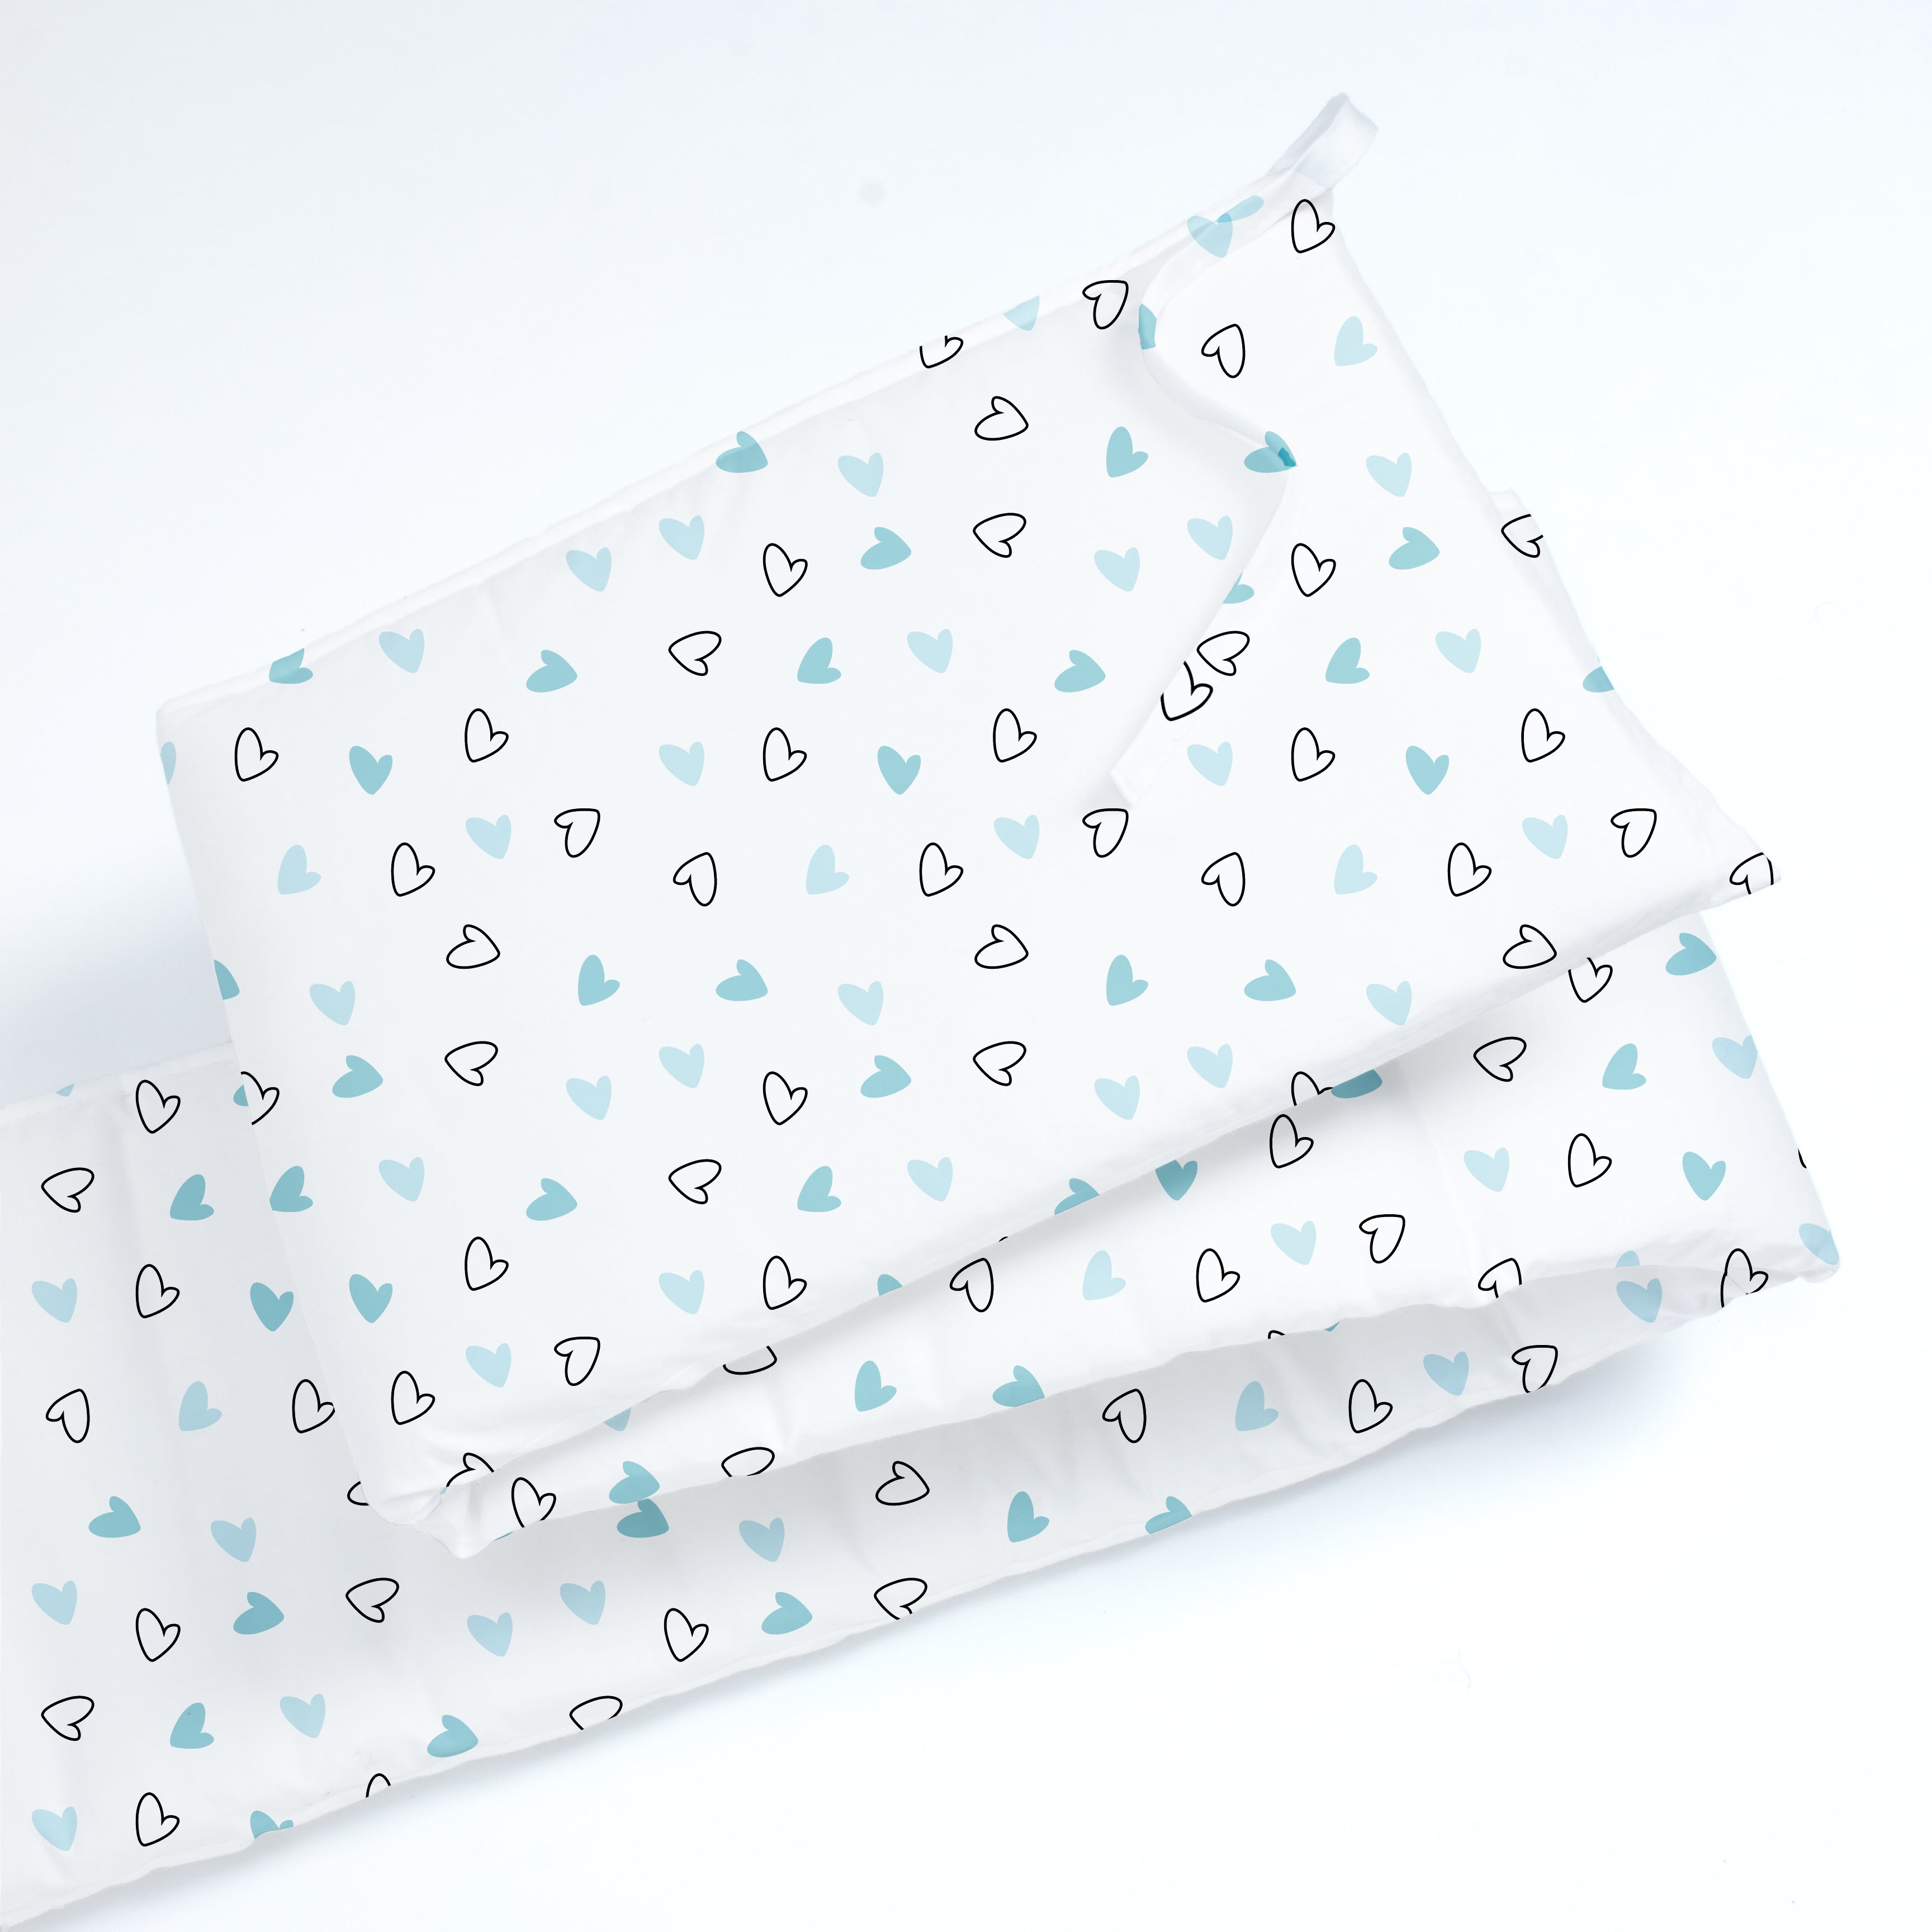 The White Cradle Baby Safe Cot Bumper Pad, Fits all Standard Cribs, Thick Padded Protective Liner for Child Nursery Bed, Soft Organic Cotton Fabric, Breathable, Non-Allergenic - Twill Blue Hearts